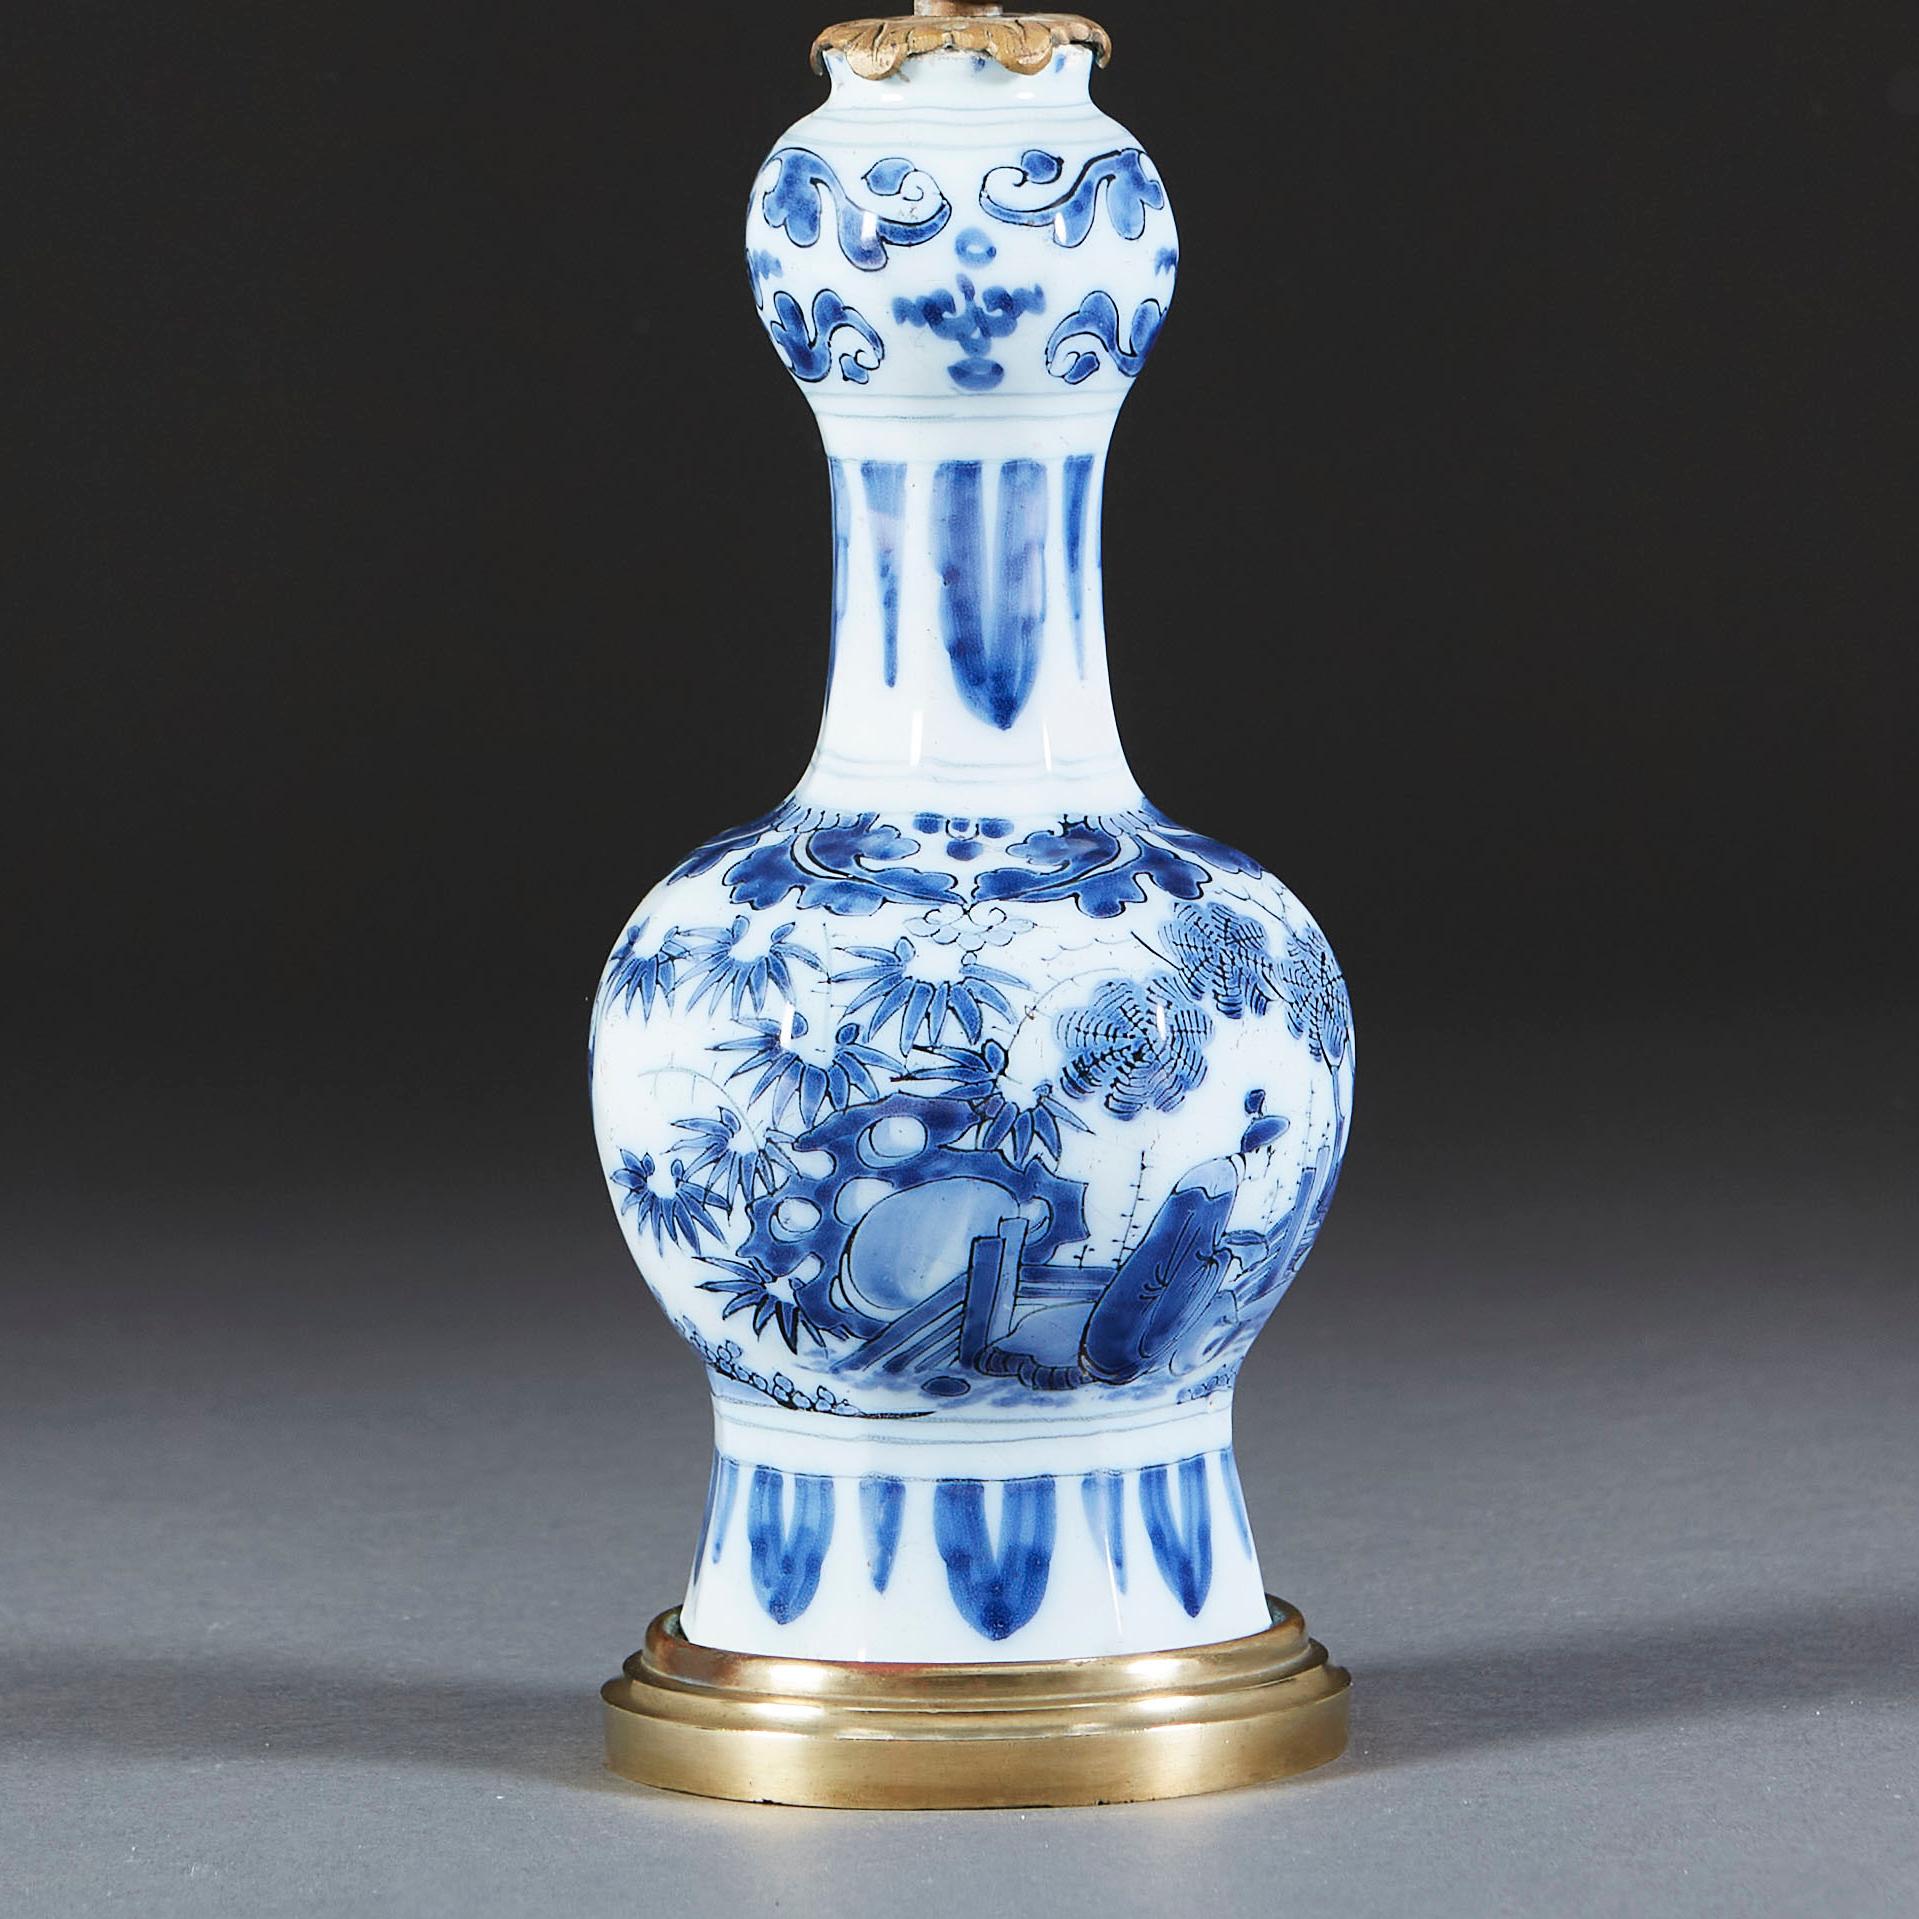 A mid nineteenth century blue and white Delft lamp decorated with oriental scenes and floral motifs, mounted on a brass base and converted as a table lamp.

Please note: lampshade not included.

Currently wired for the UK.